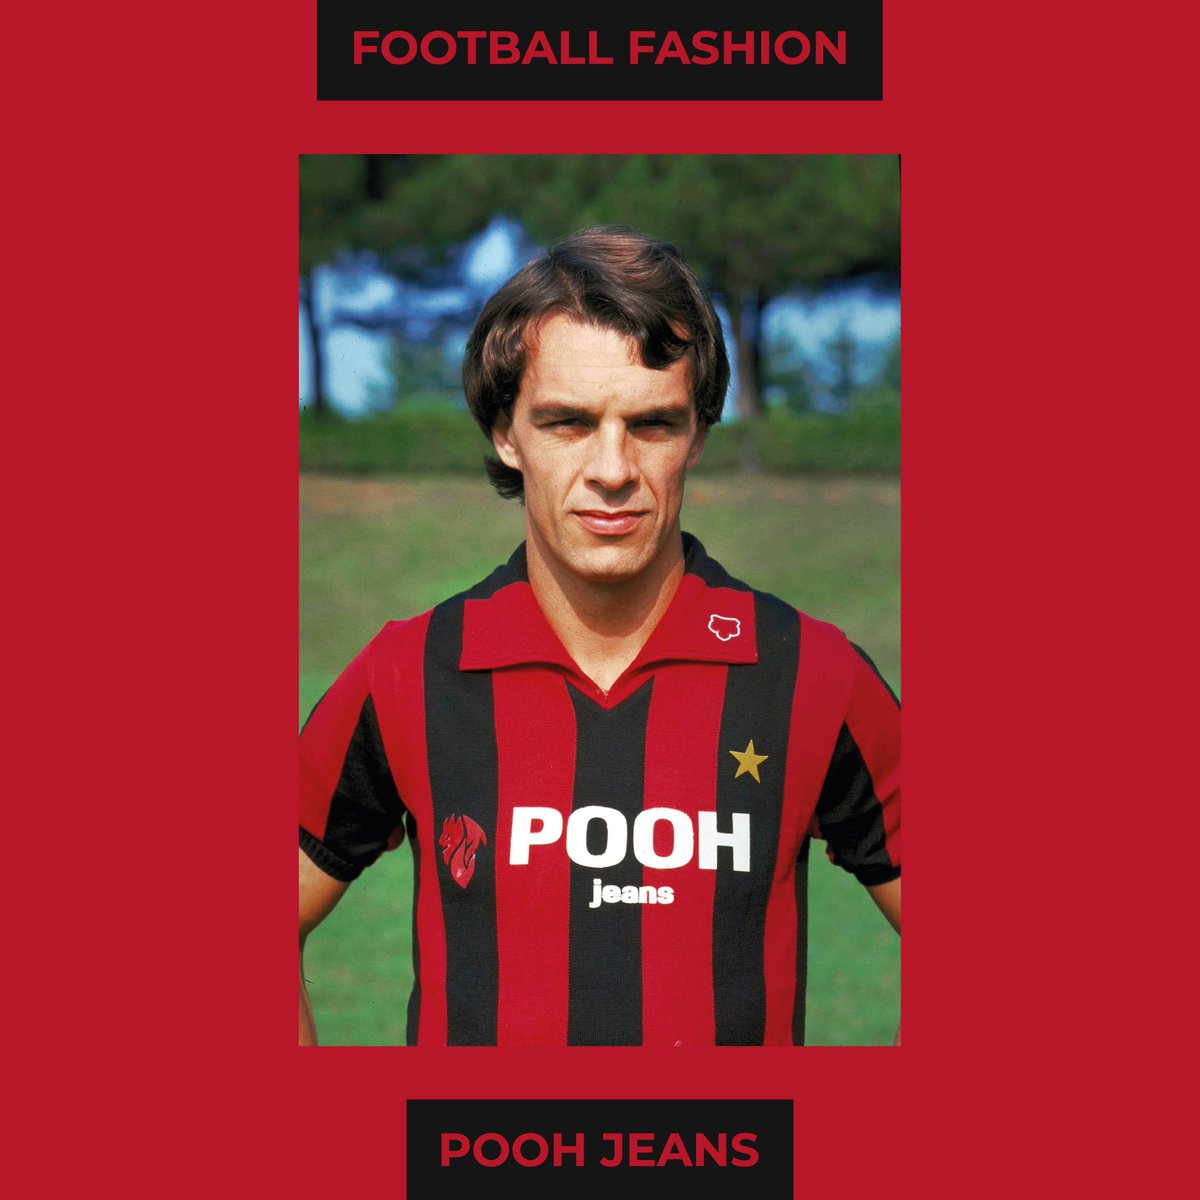 Football Fashion: AC Milan and Pooh JeansCan you think of any other fashion brands that have sponsored a football team?